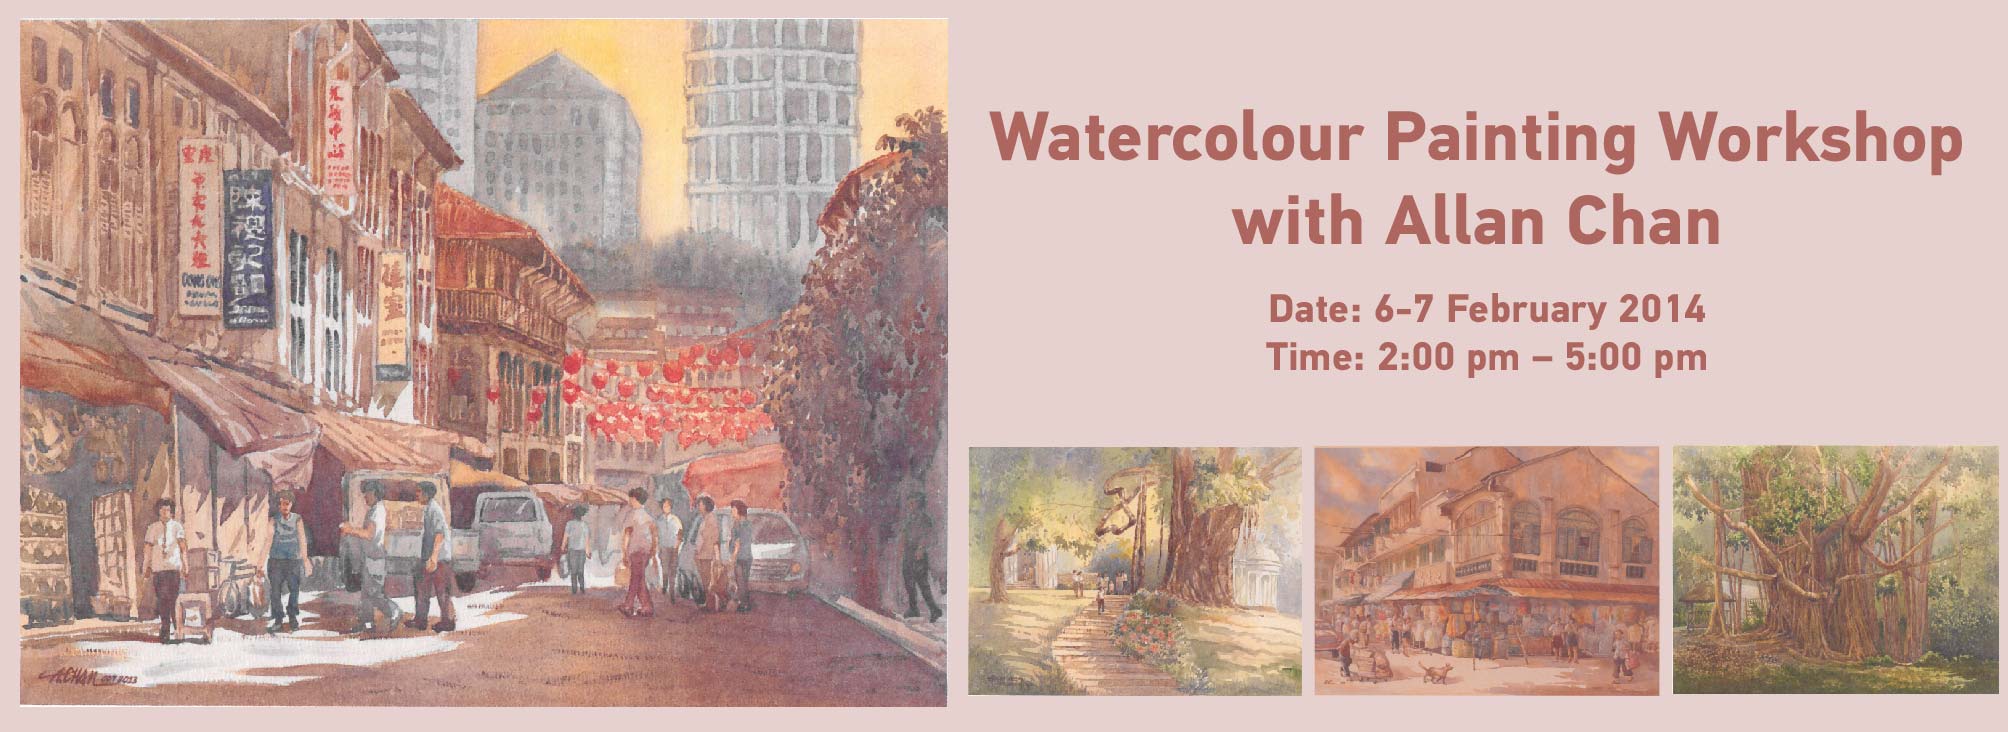 Watercolour Painting Workshop with Allan Chan